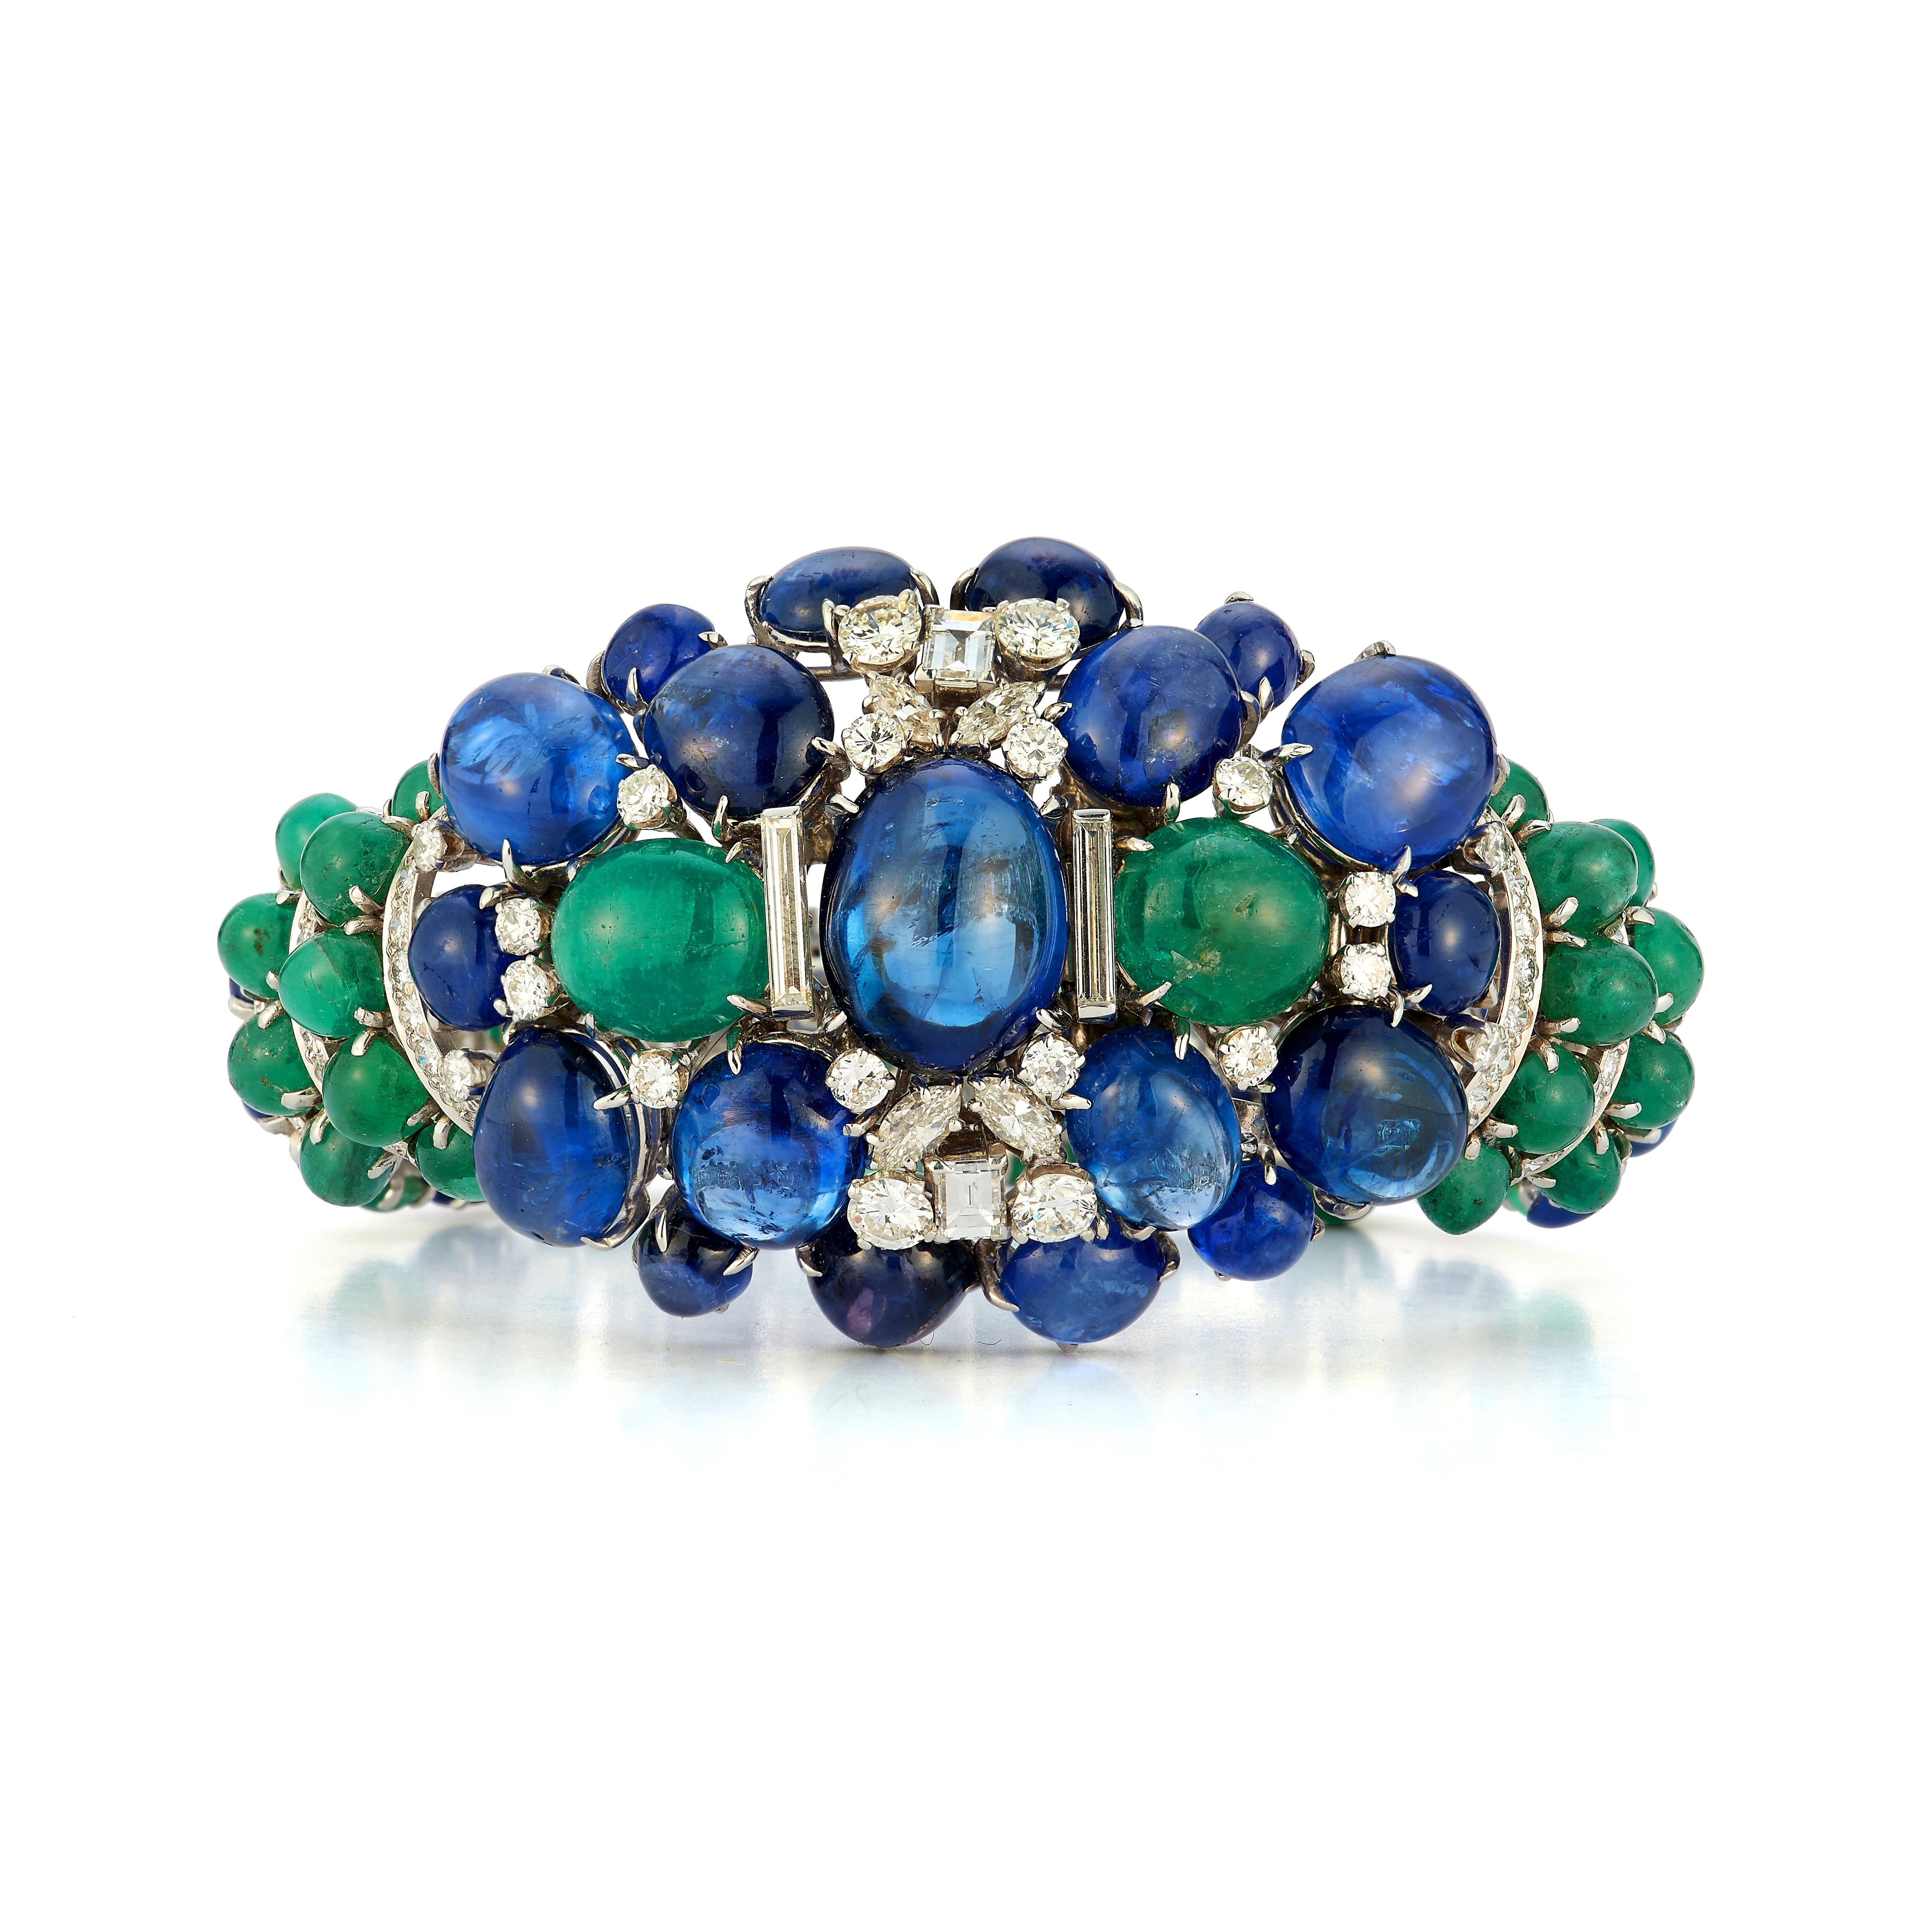 David Webb Cabochon Sapphire & Emerald Bracelet

This beautiful bracelet is made of platinum and 18 karat white gold set with 43 cabochon sapphires, the largest of which is approximately 20 carats, 44 cabochon emeralds, and 179 multi cut